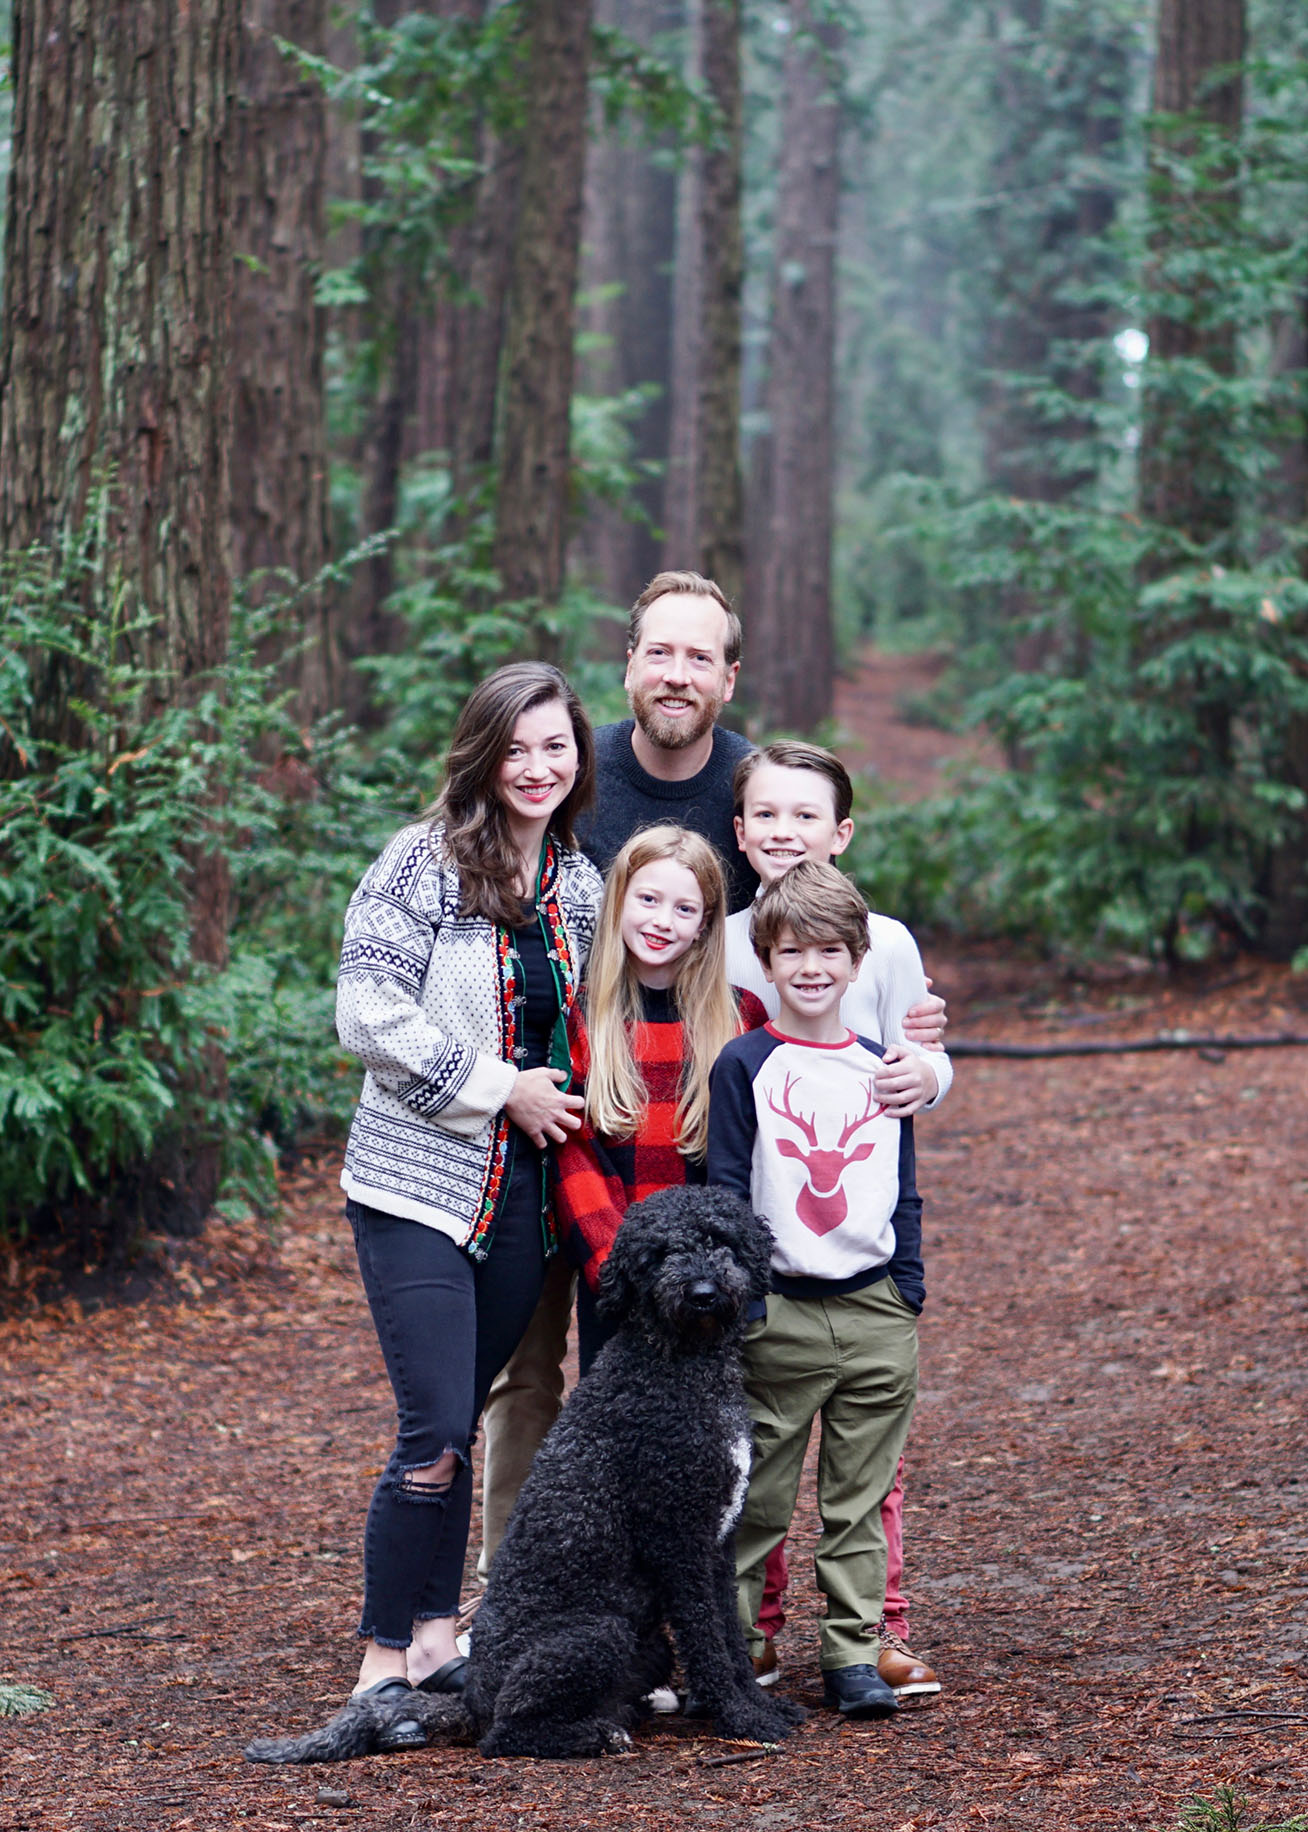 Kevin Knight and his family of 5 stand in a forest with large pine trees. 